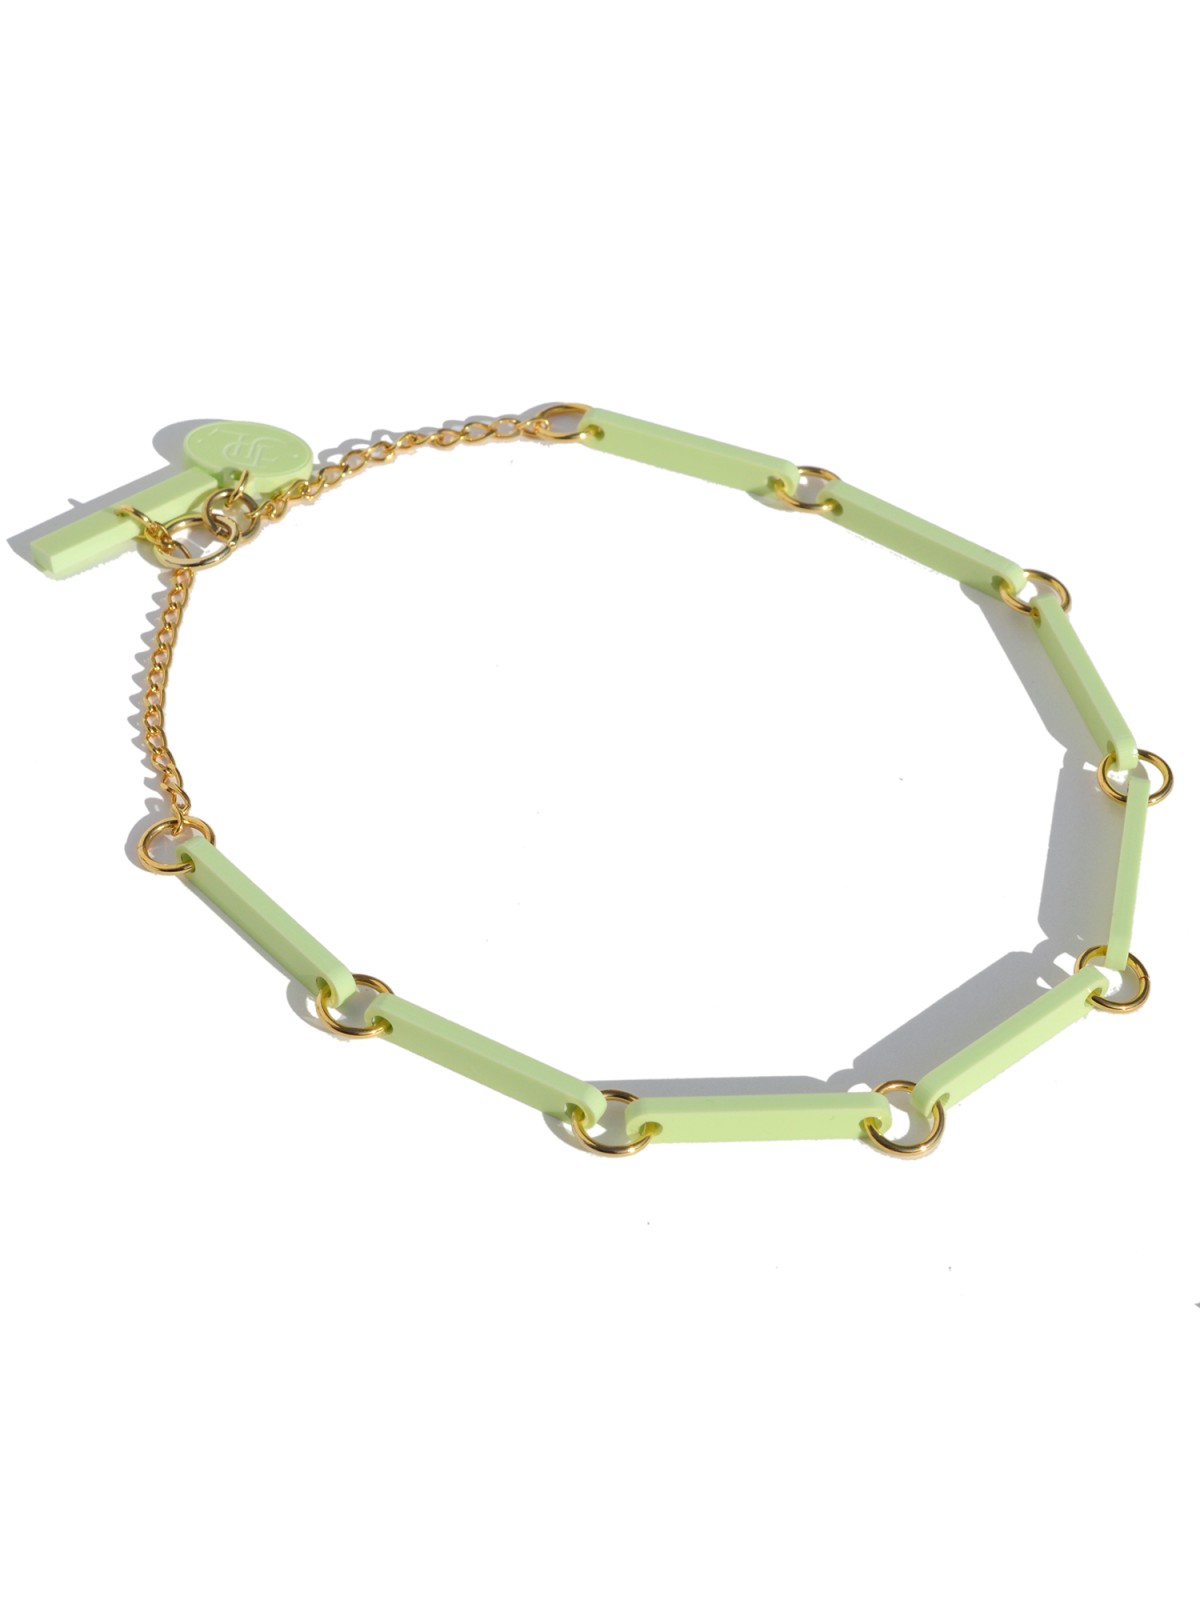 Light green bands necklaces San Fabrizzio